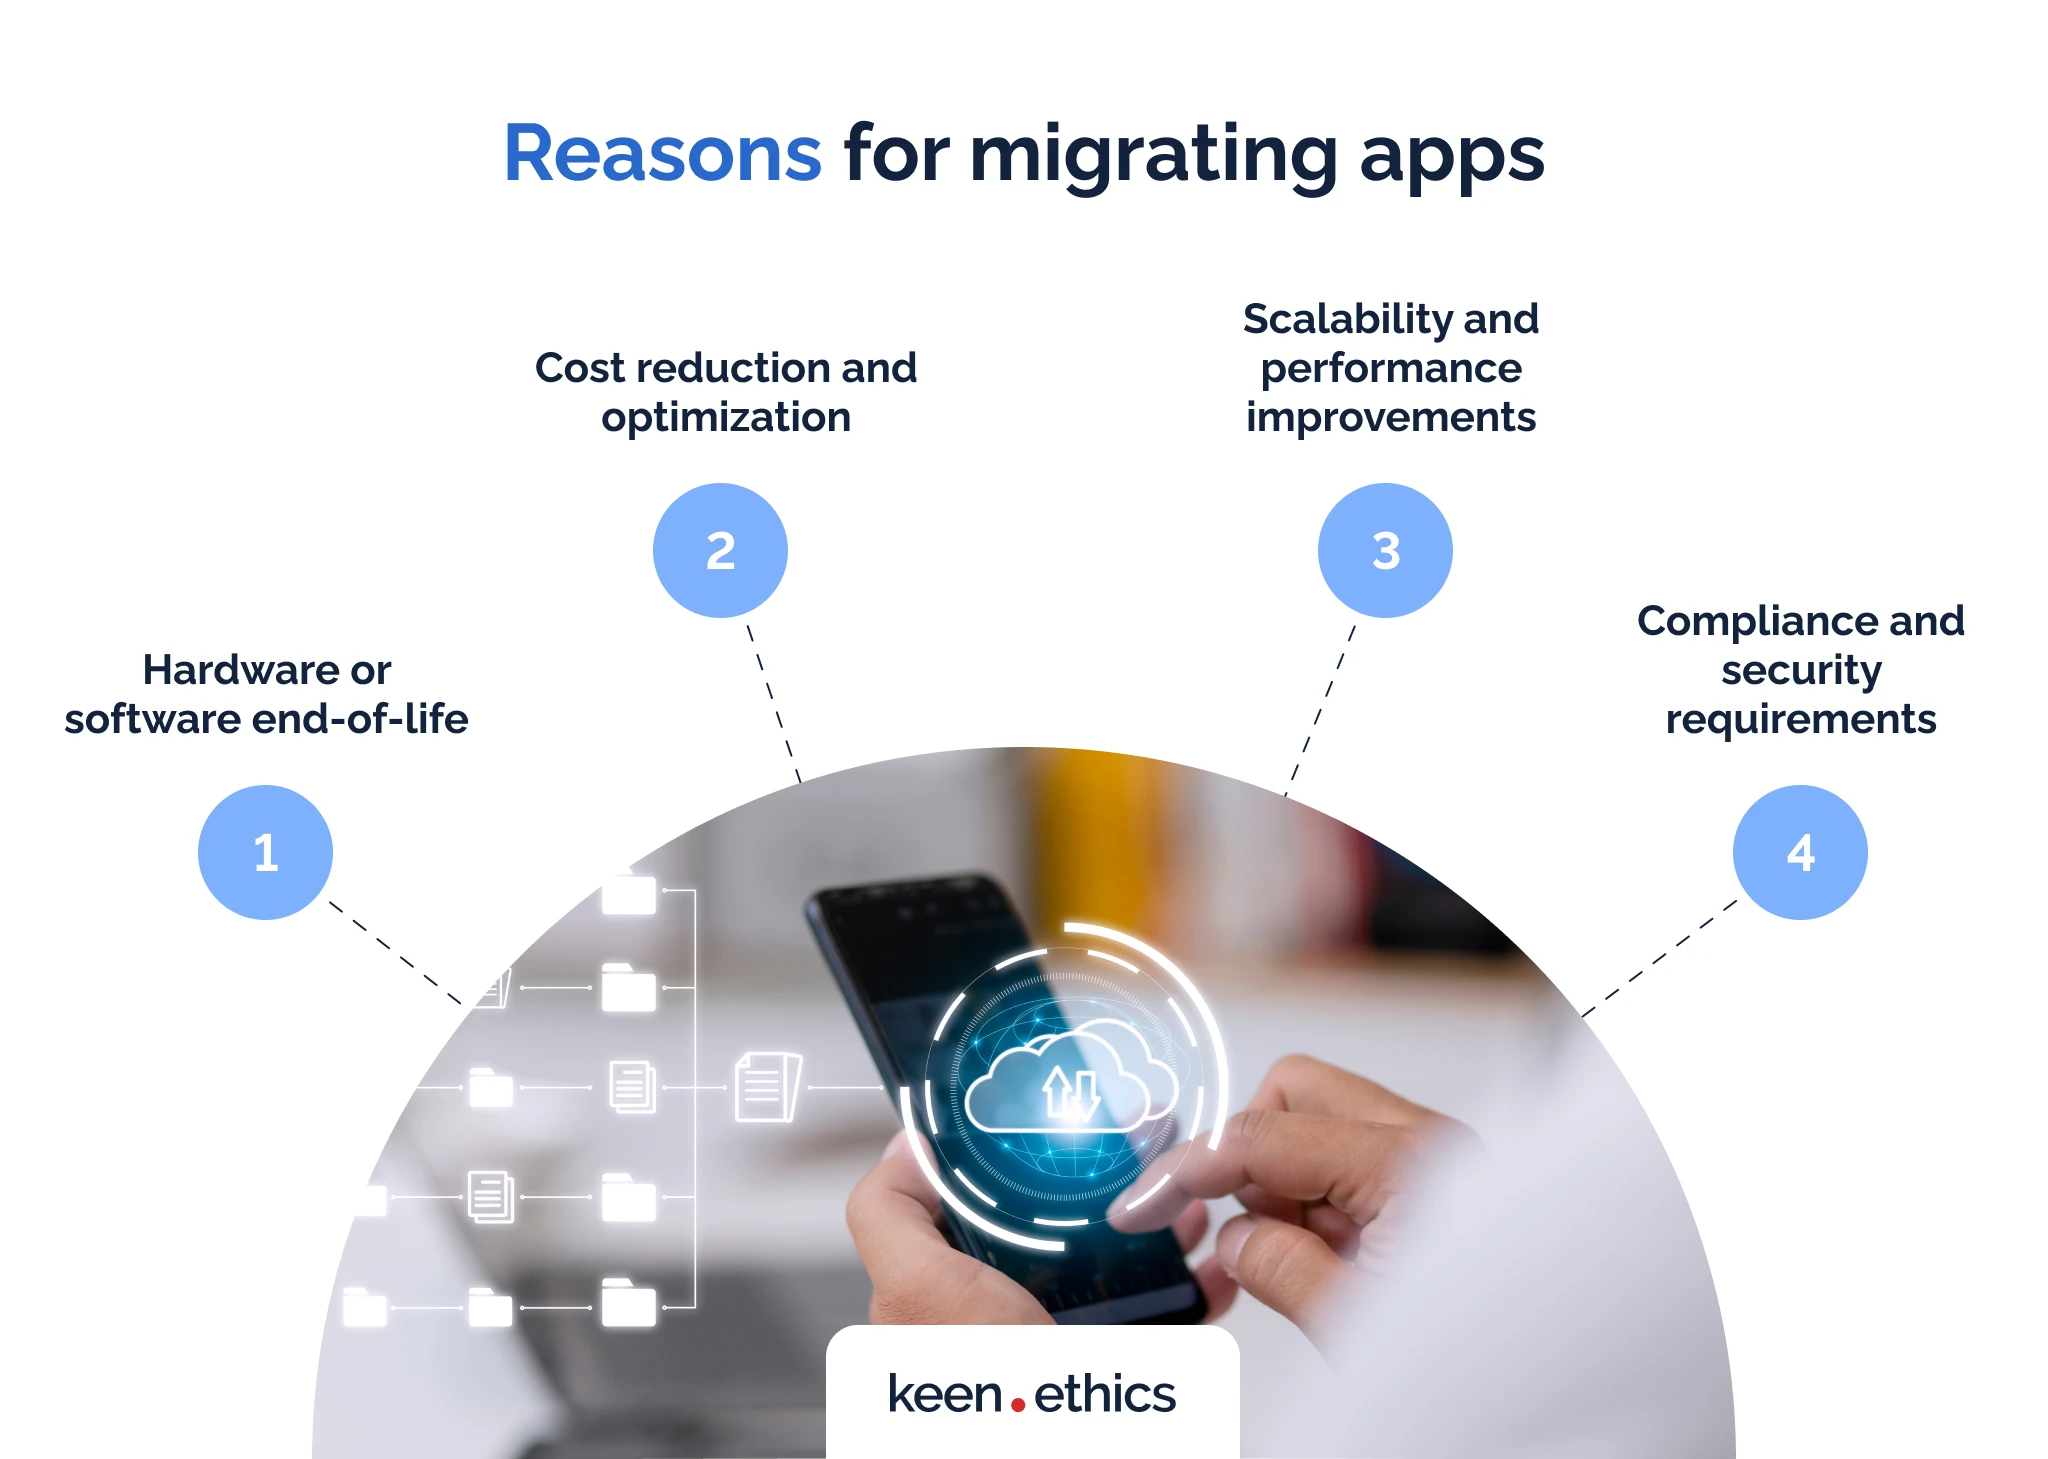 Reasons for migrating apps